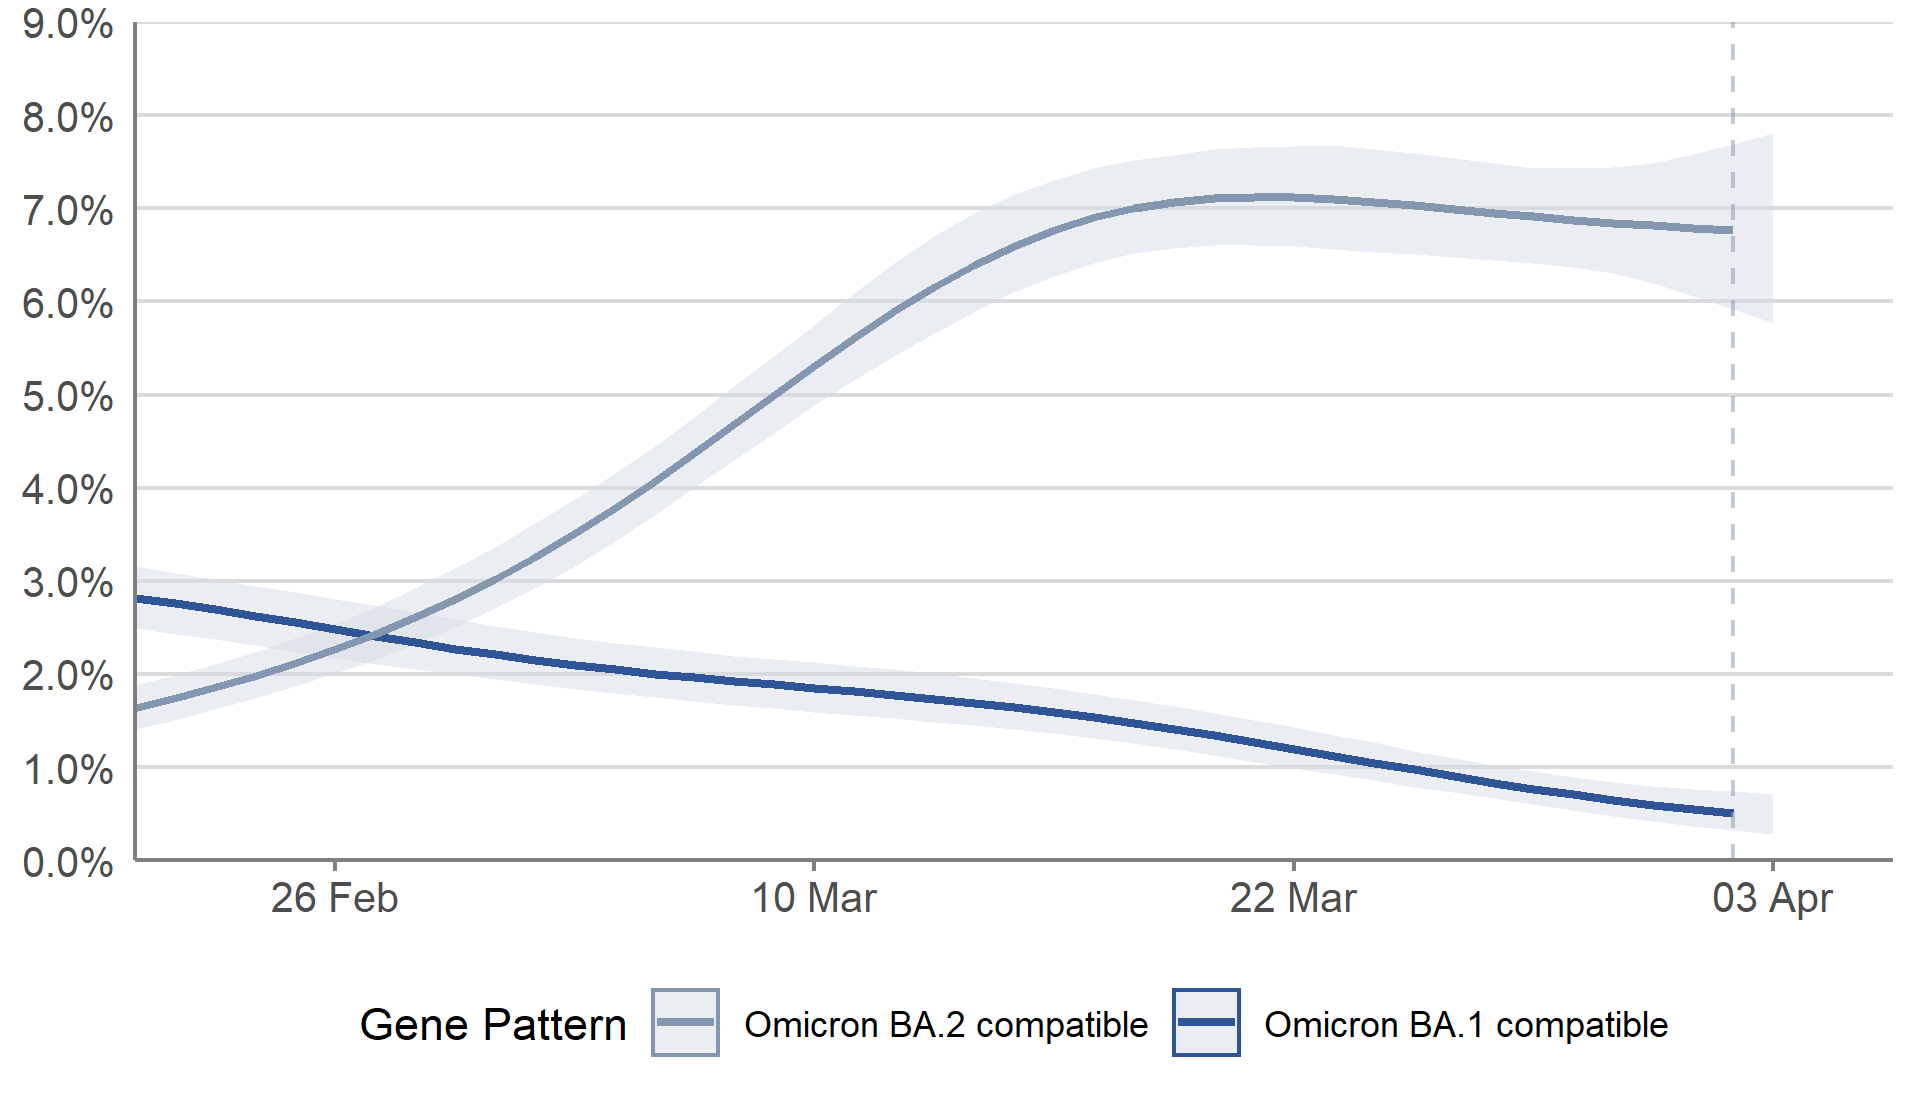 In Scotland, the trend in the percentage of people with infections compatible with the Omicron BA.2 variant is uncertain in the most recent week. The percentage of people with infections compatible with the Omicron BA.1 decreased in the most recent week.